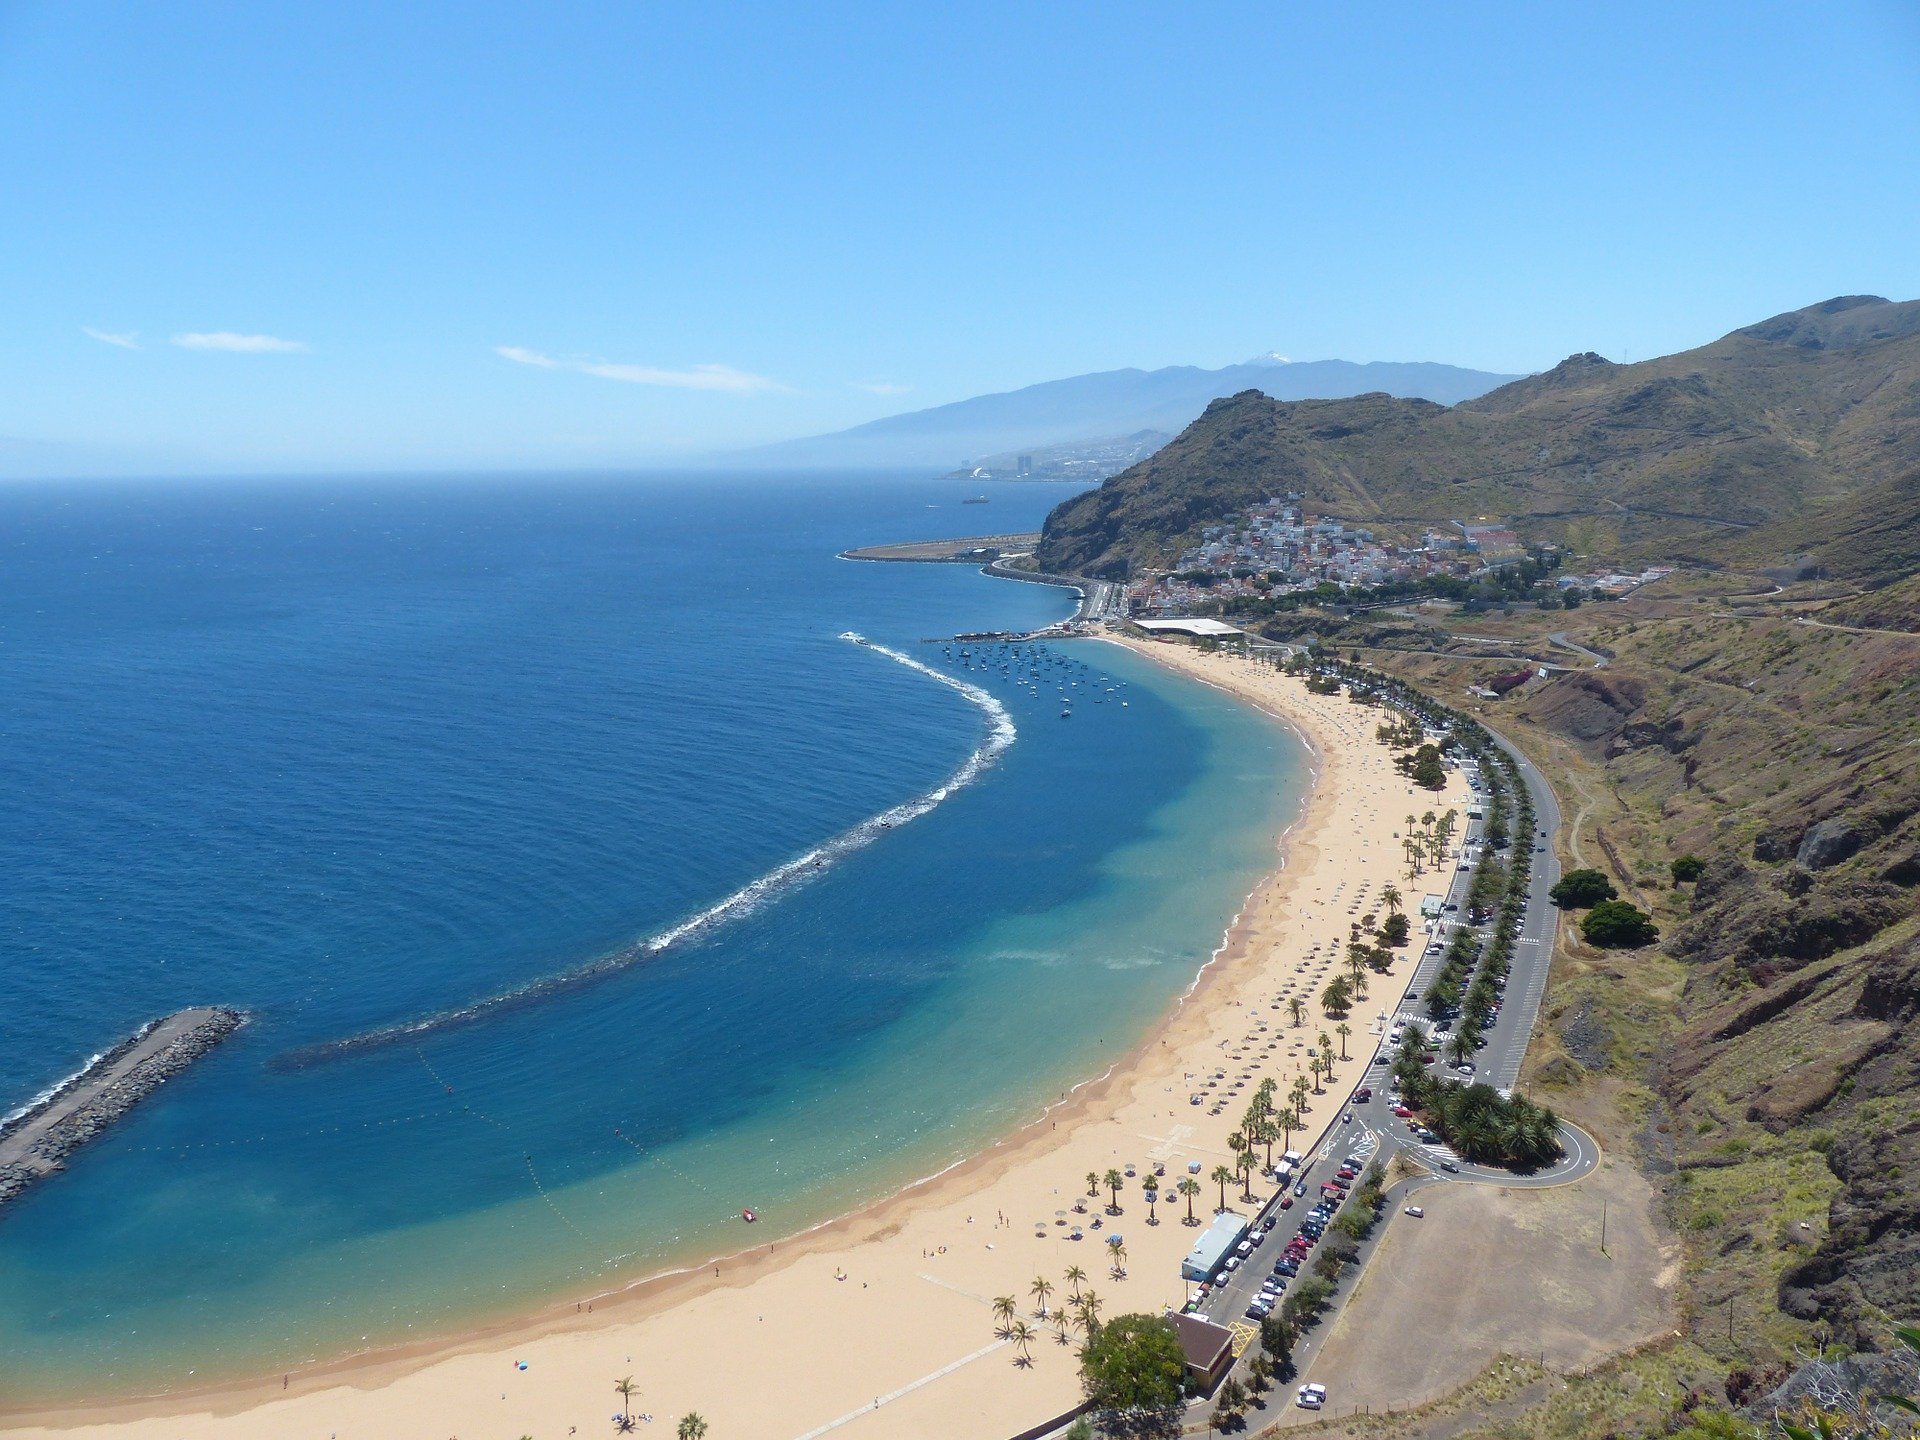 How To Get From Tenerife Airport To City Center - All Possible Ways